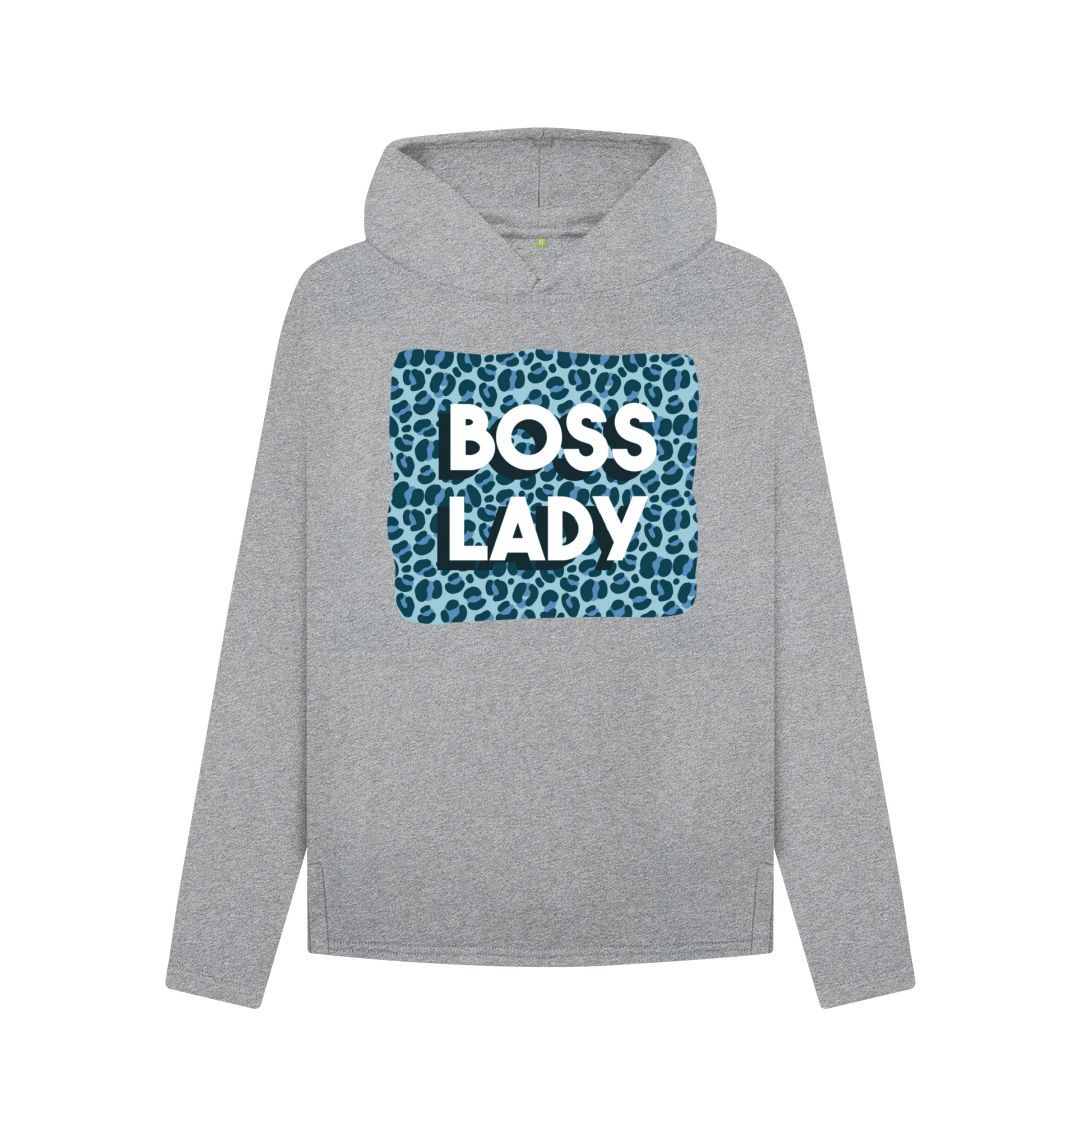 Athletic Grey Boss Lady Women's Relaxed Fit Hoodie